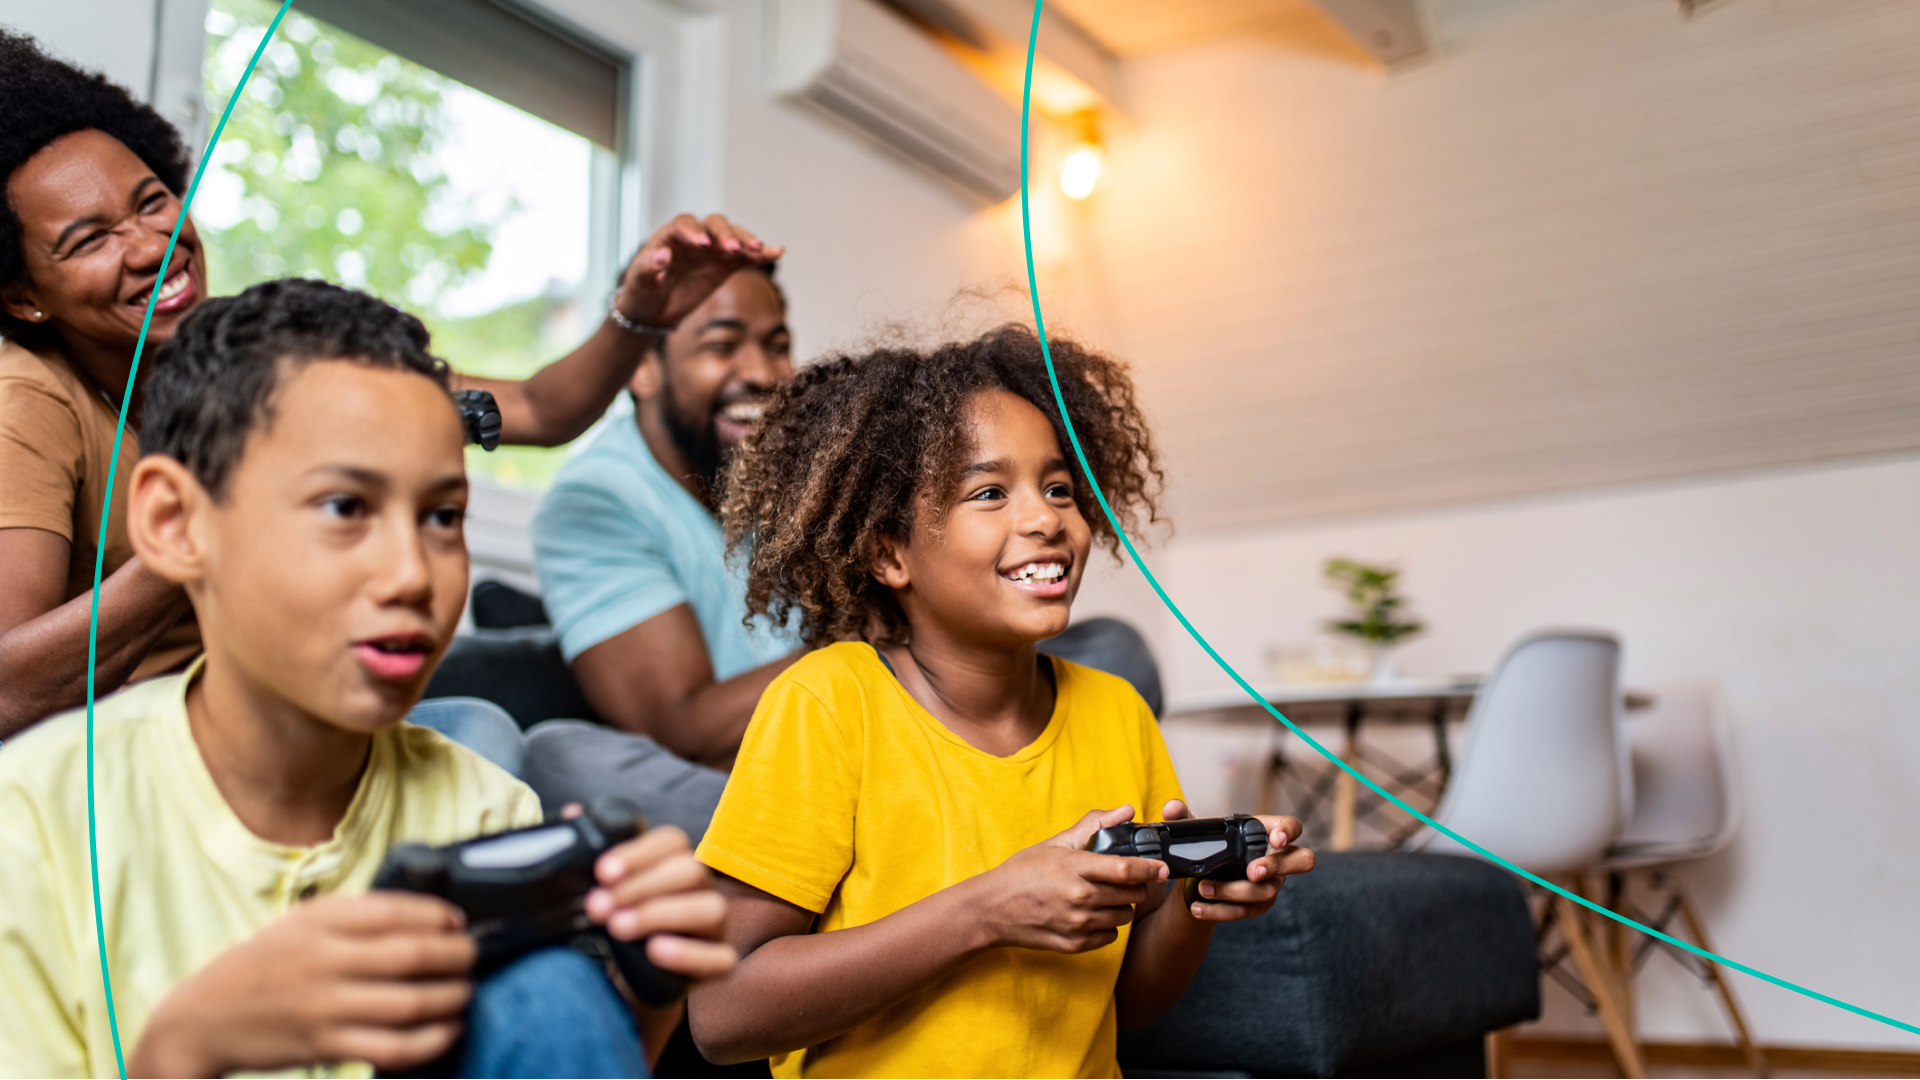 A new study may have parents reconsidering what they think about video games and kids.